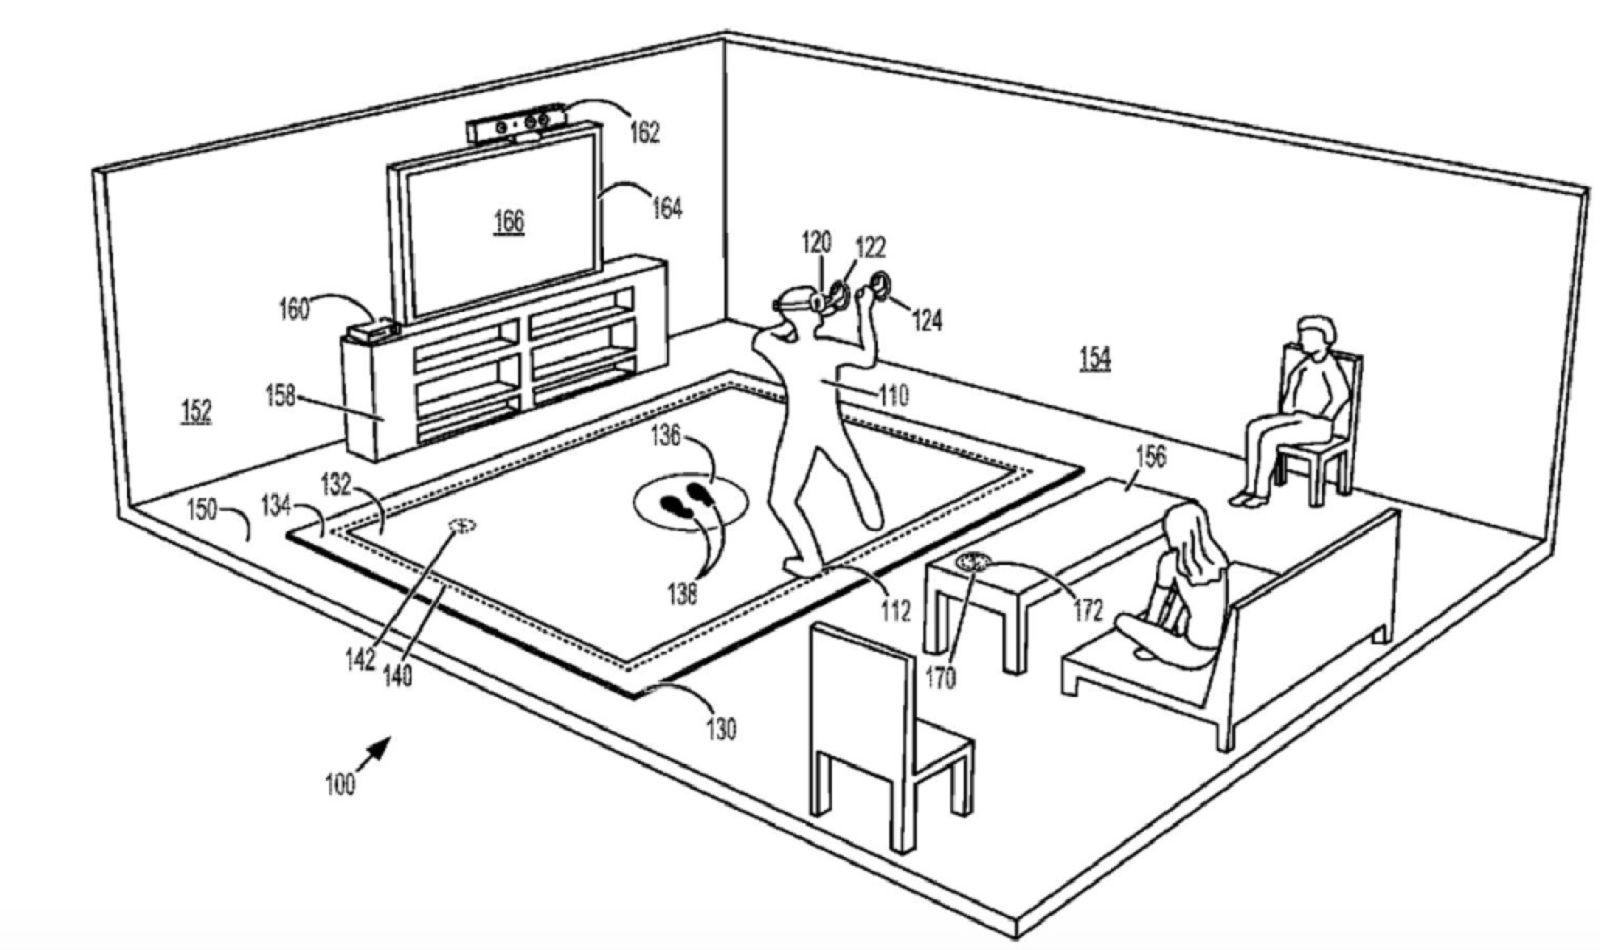 Microsoft planning a vibrating floor mat for virtual reality image 2